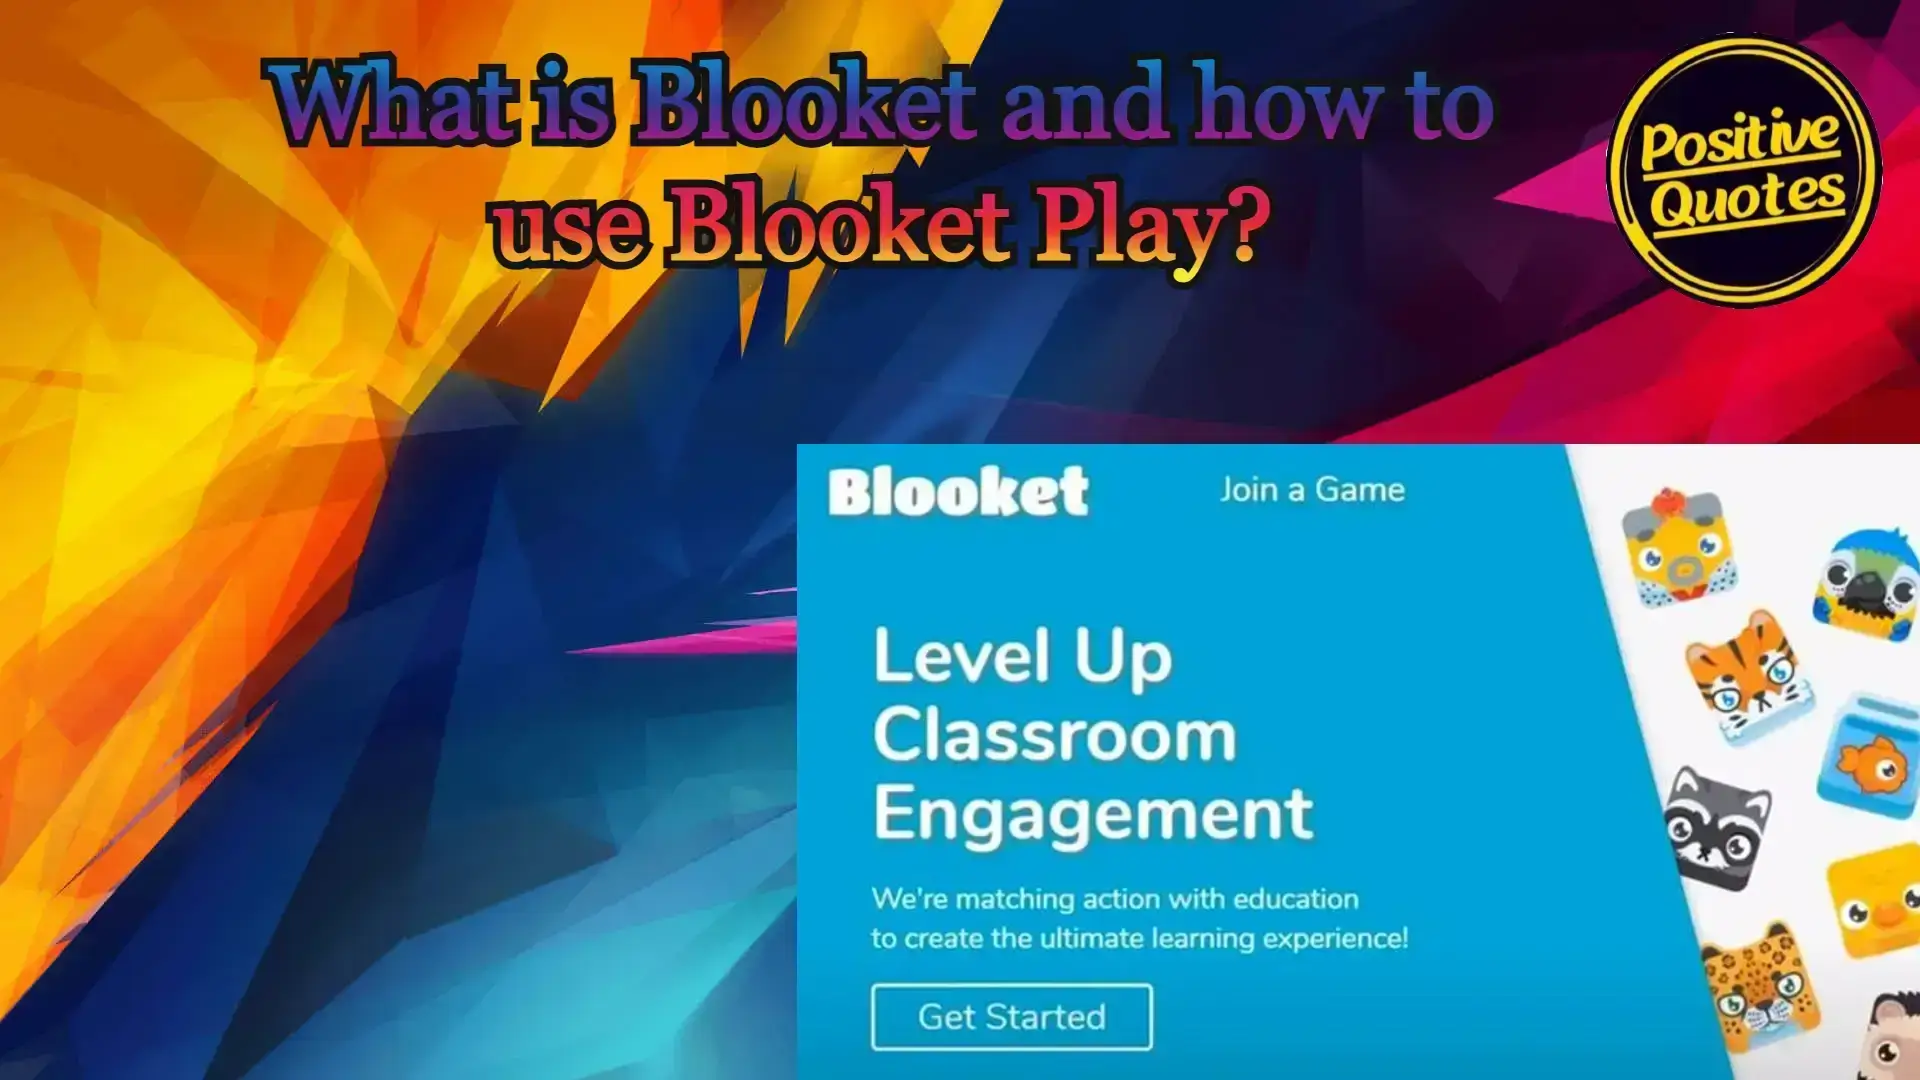 What is Blooket and how to use Blooket Play